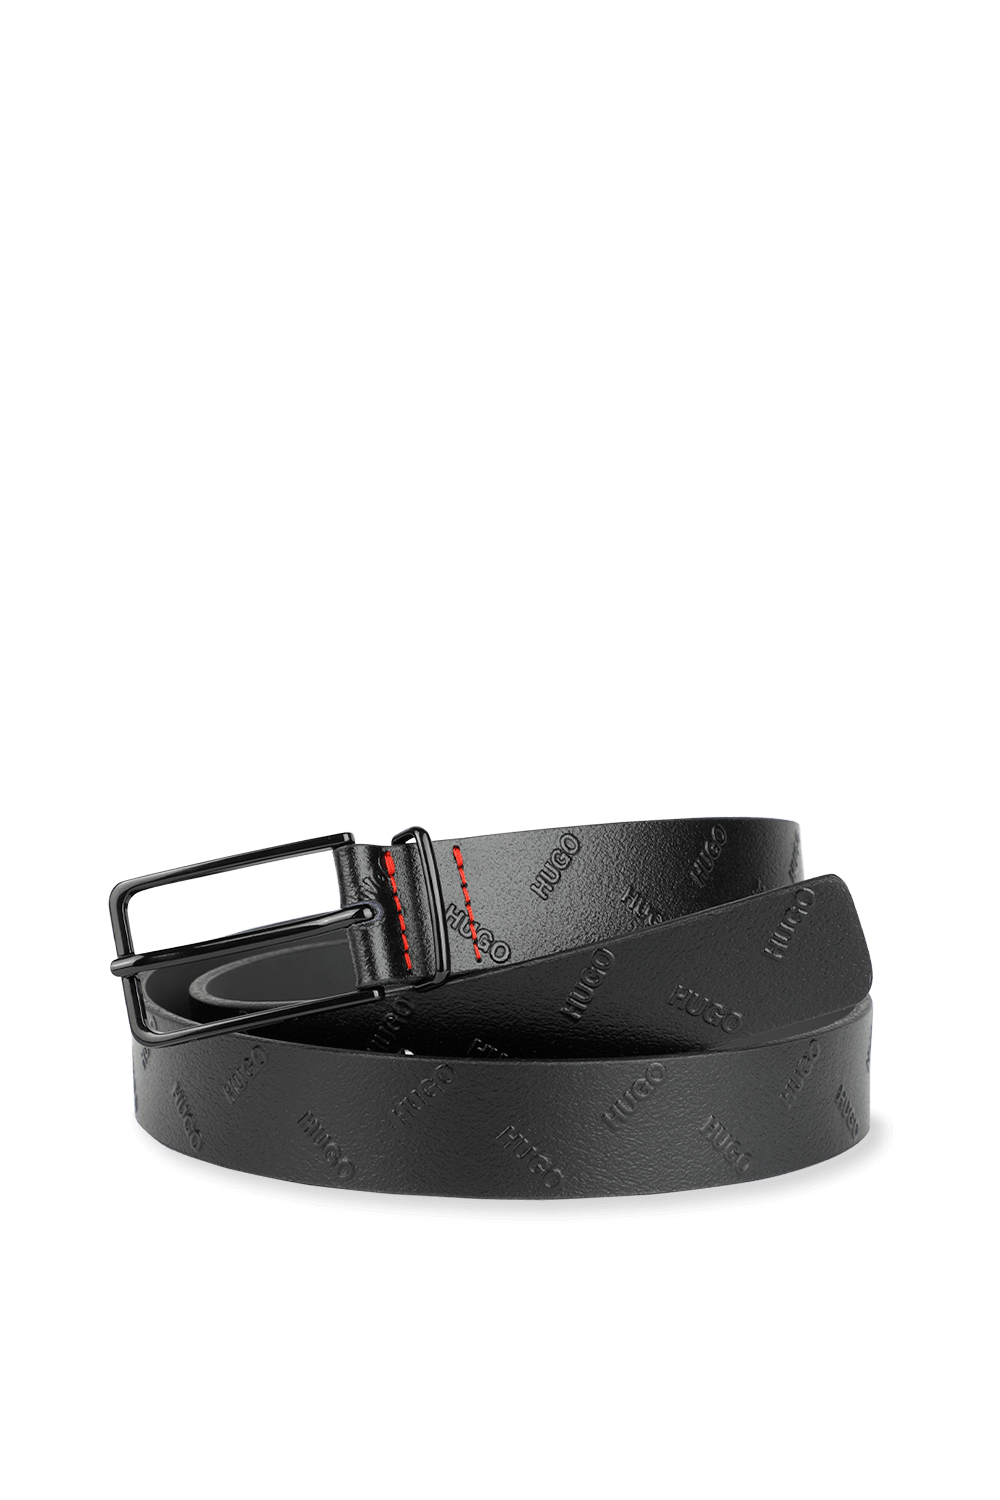 Pin-Buckle Belt in Black Leather With Embossed Logos HUGO